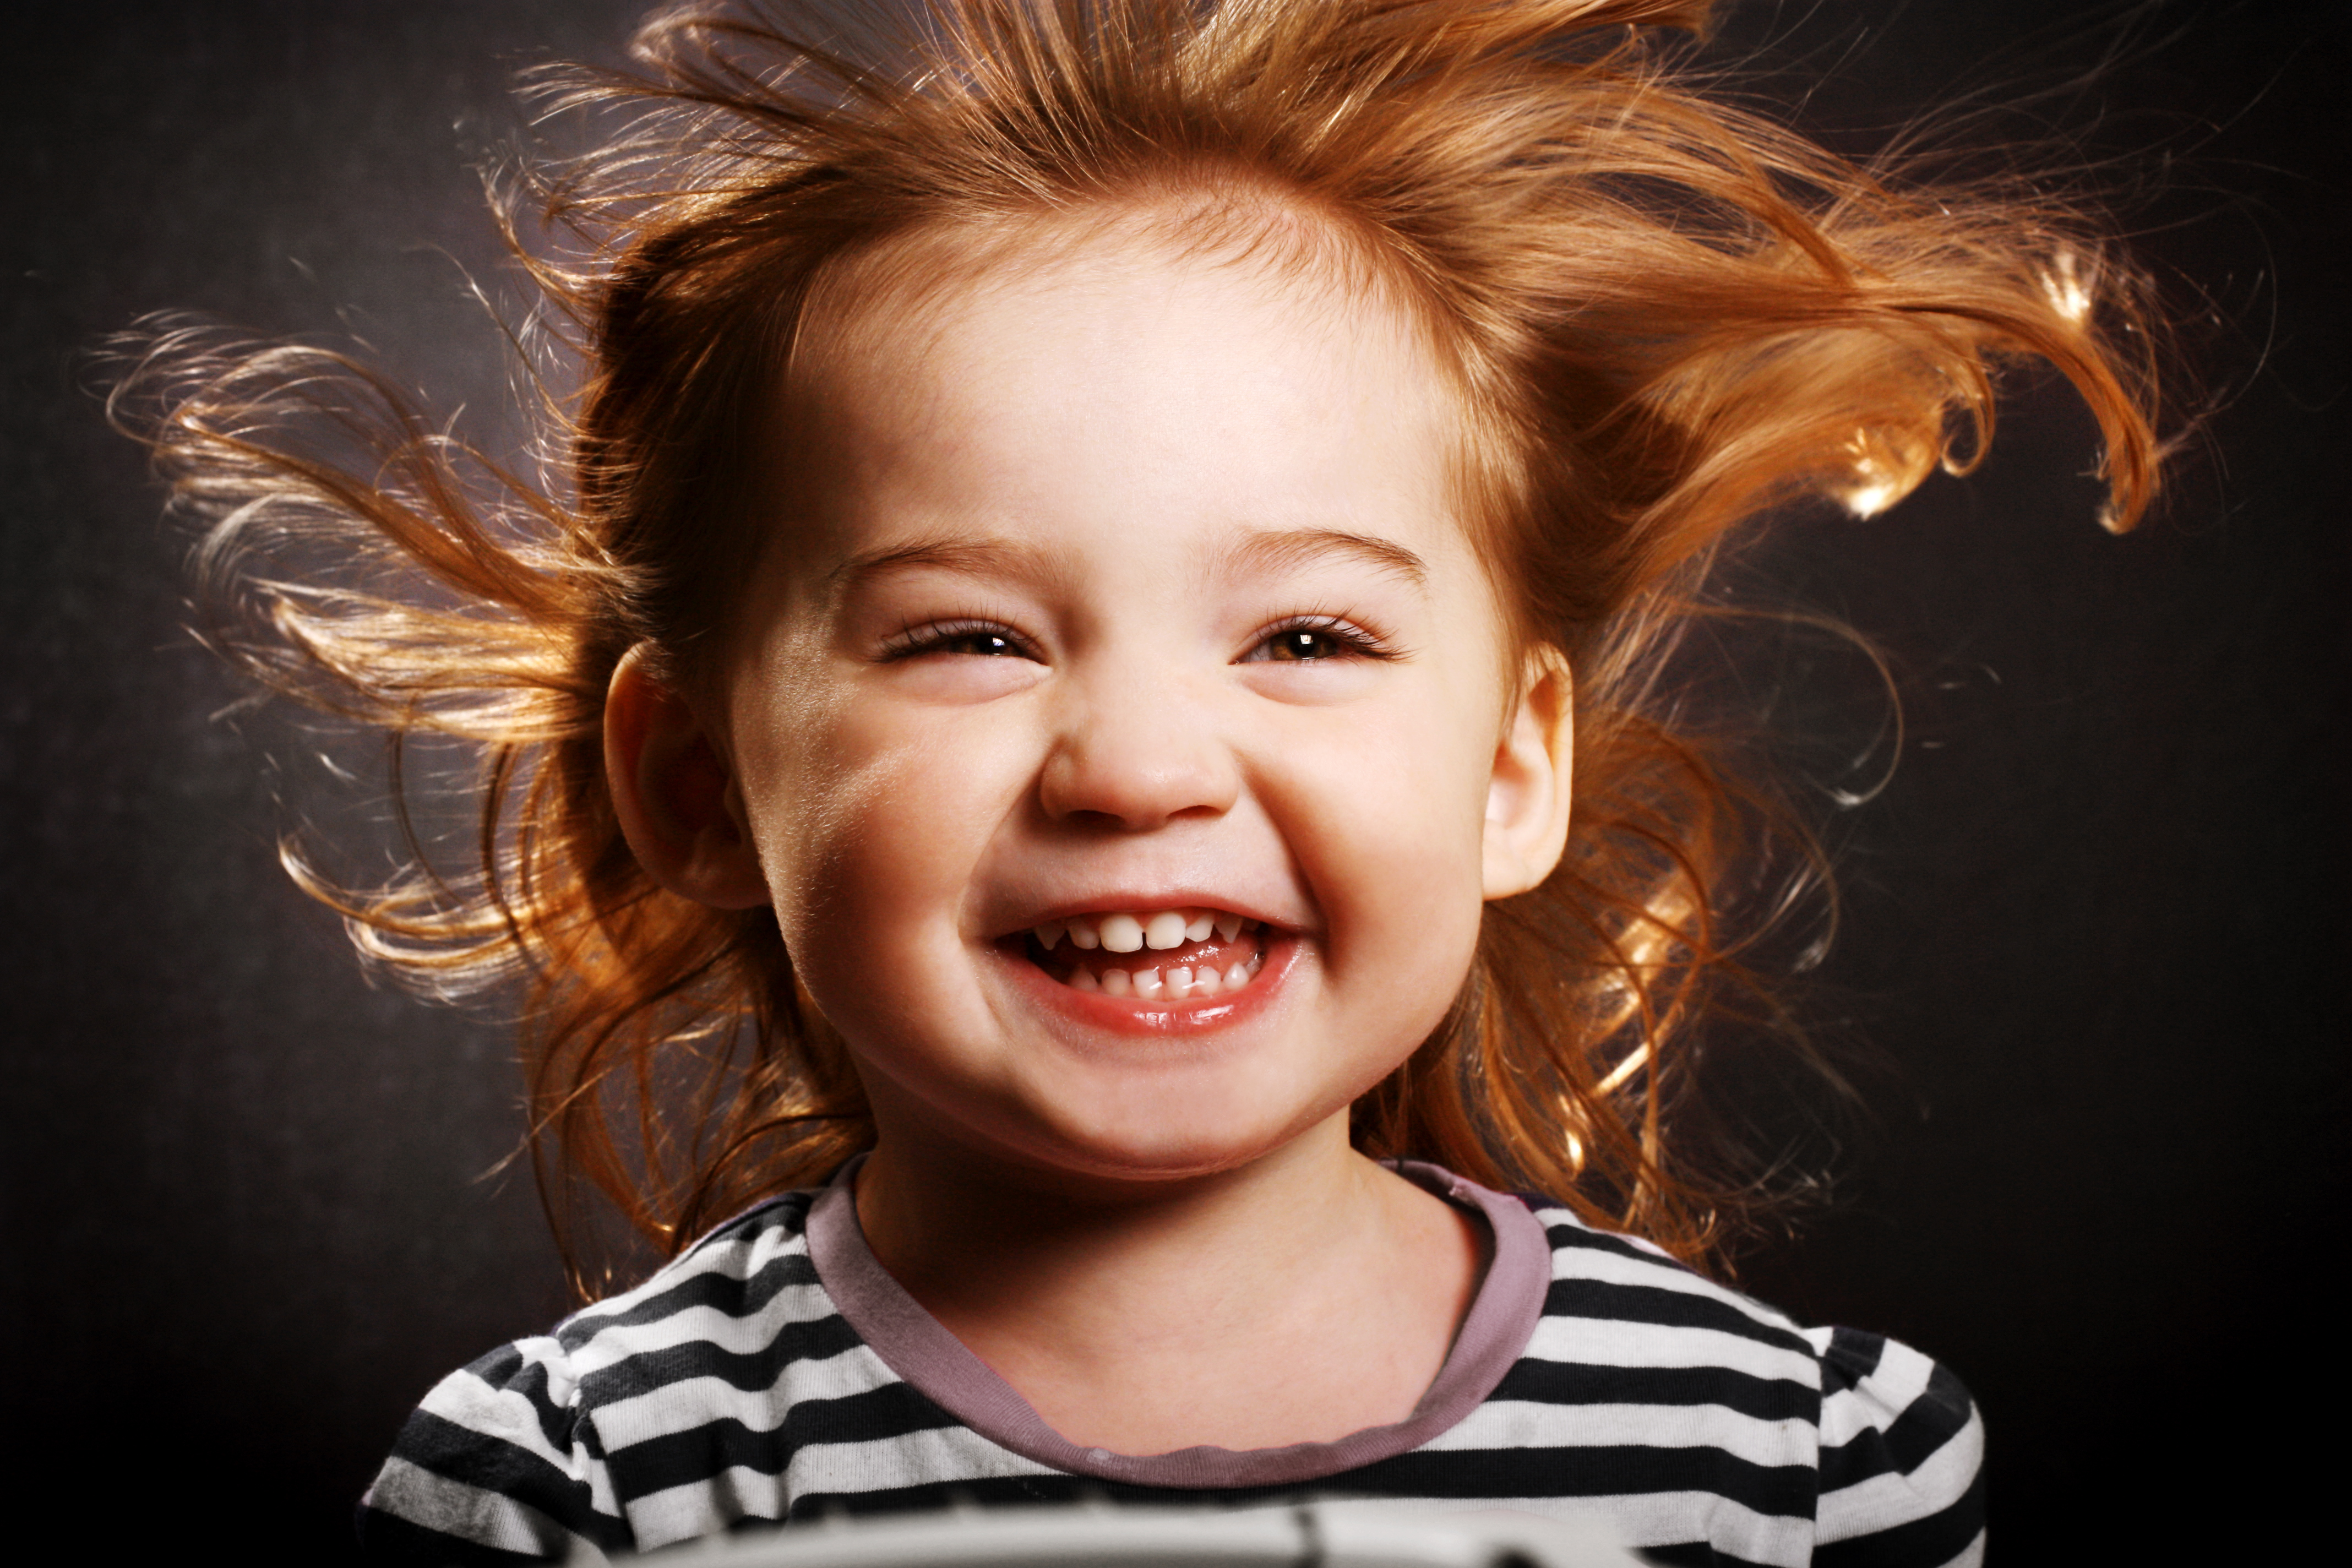 A gorgeous little girl smiling hysterically with the wind in her hair.